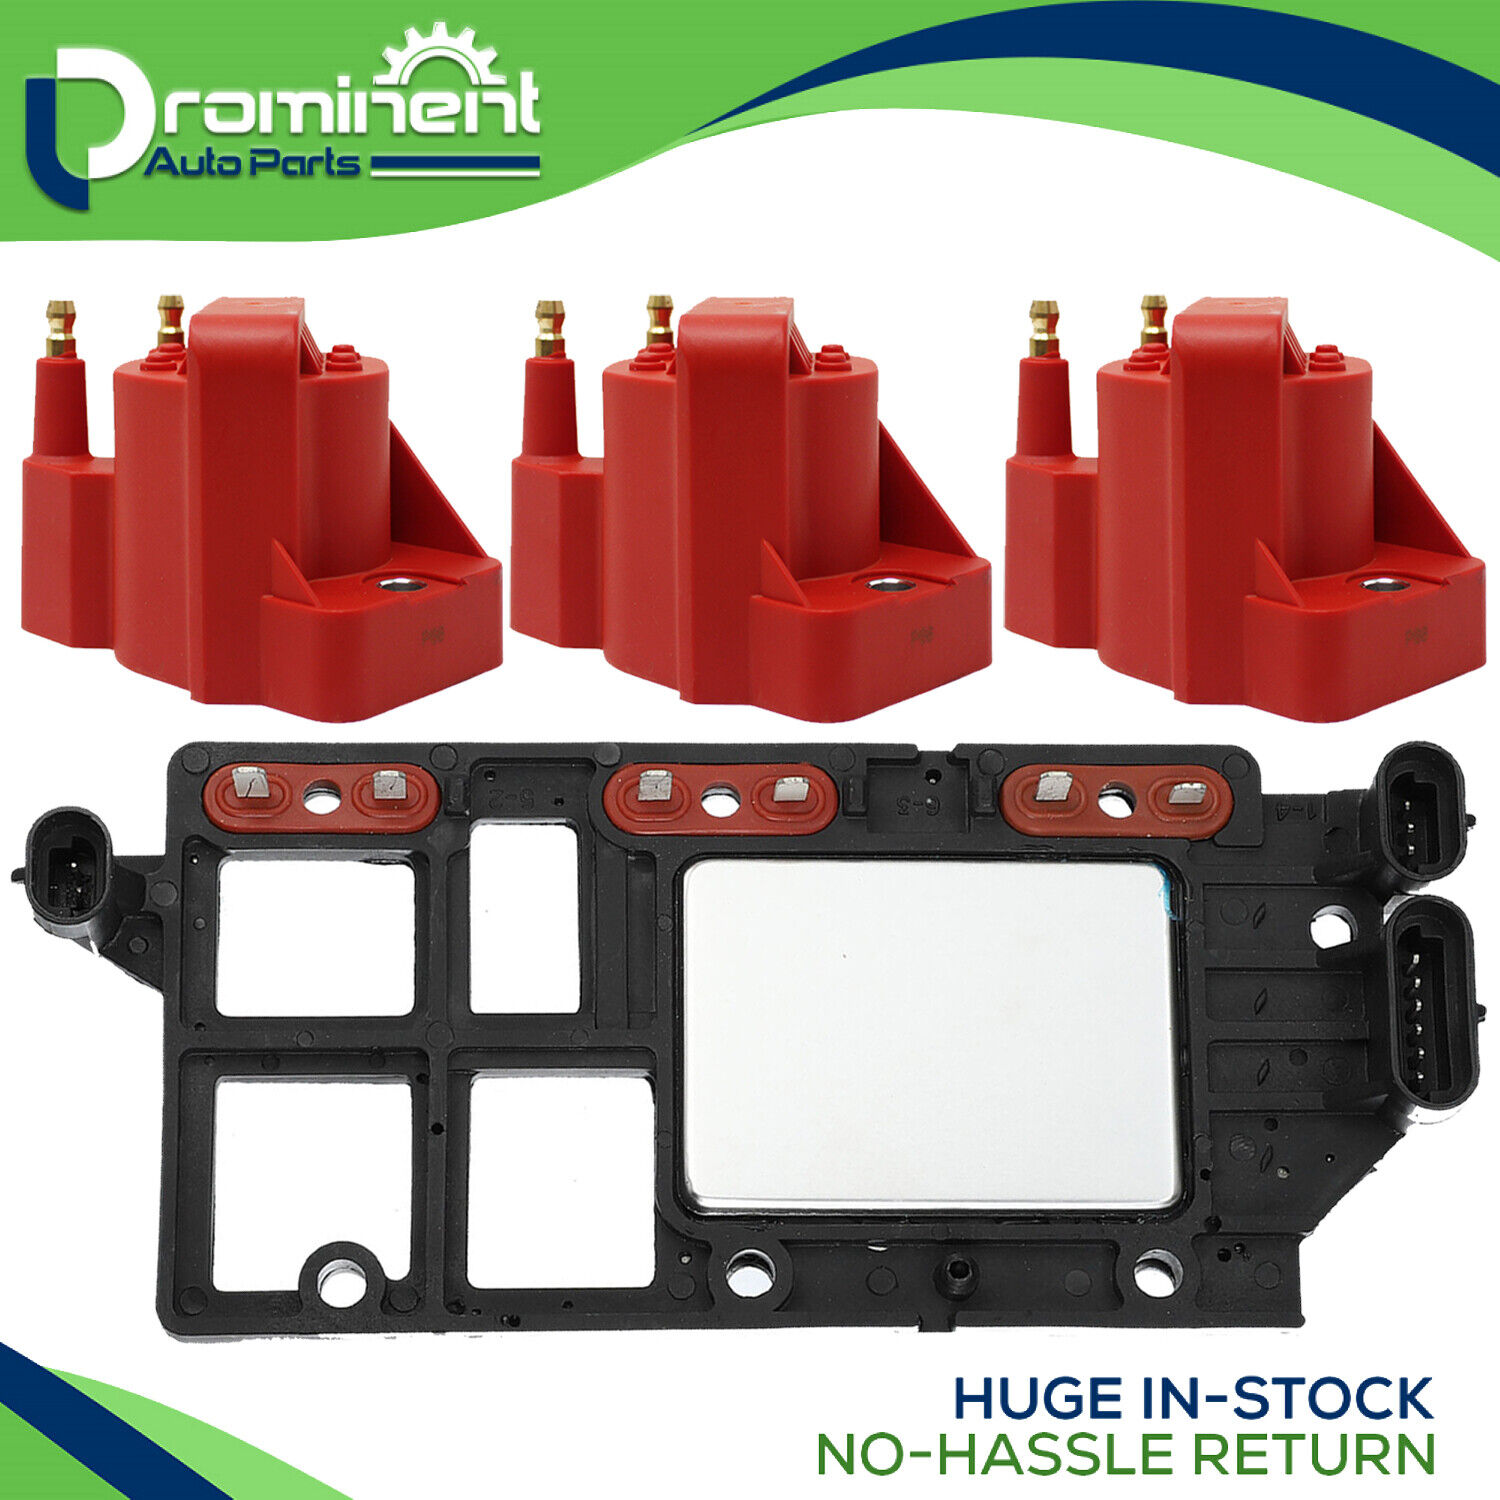 3x Racing Ignition Coil & Control Module Set for Chevy Pontiac Buick Olds Isuzu